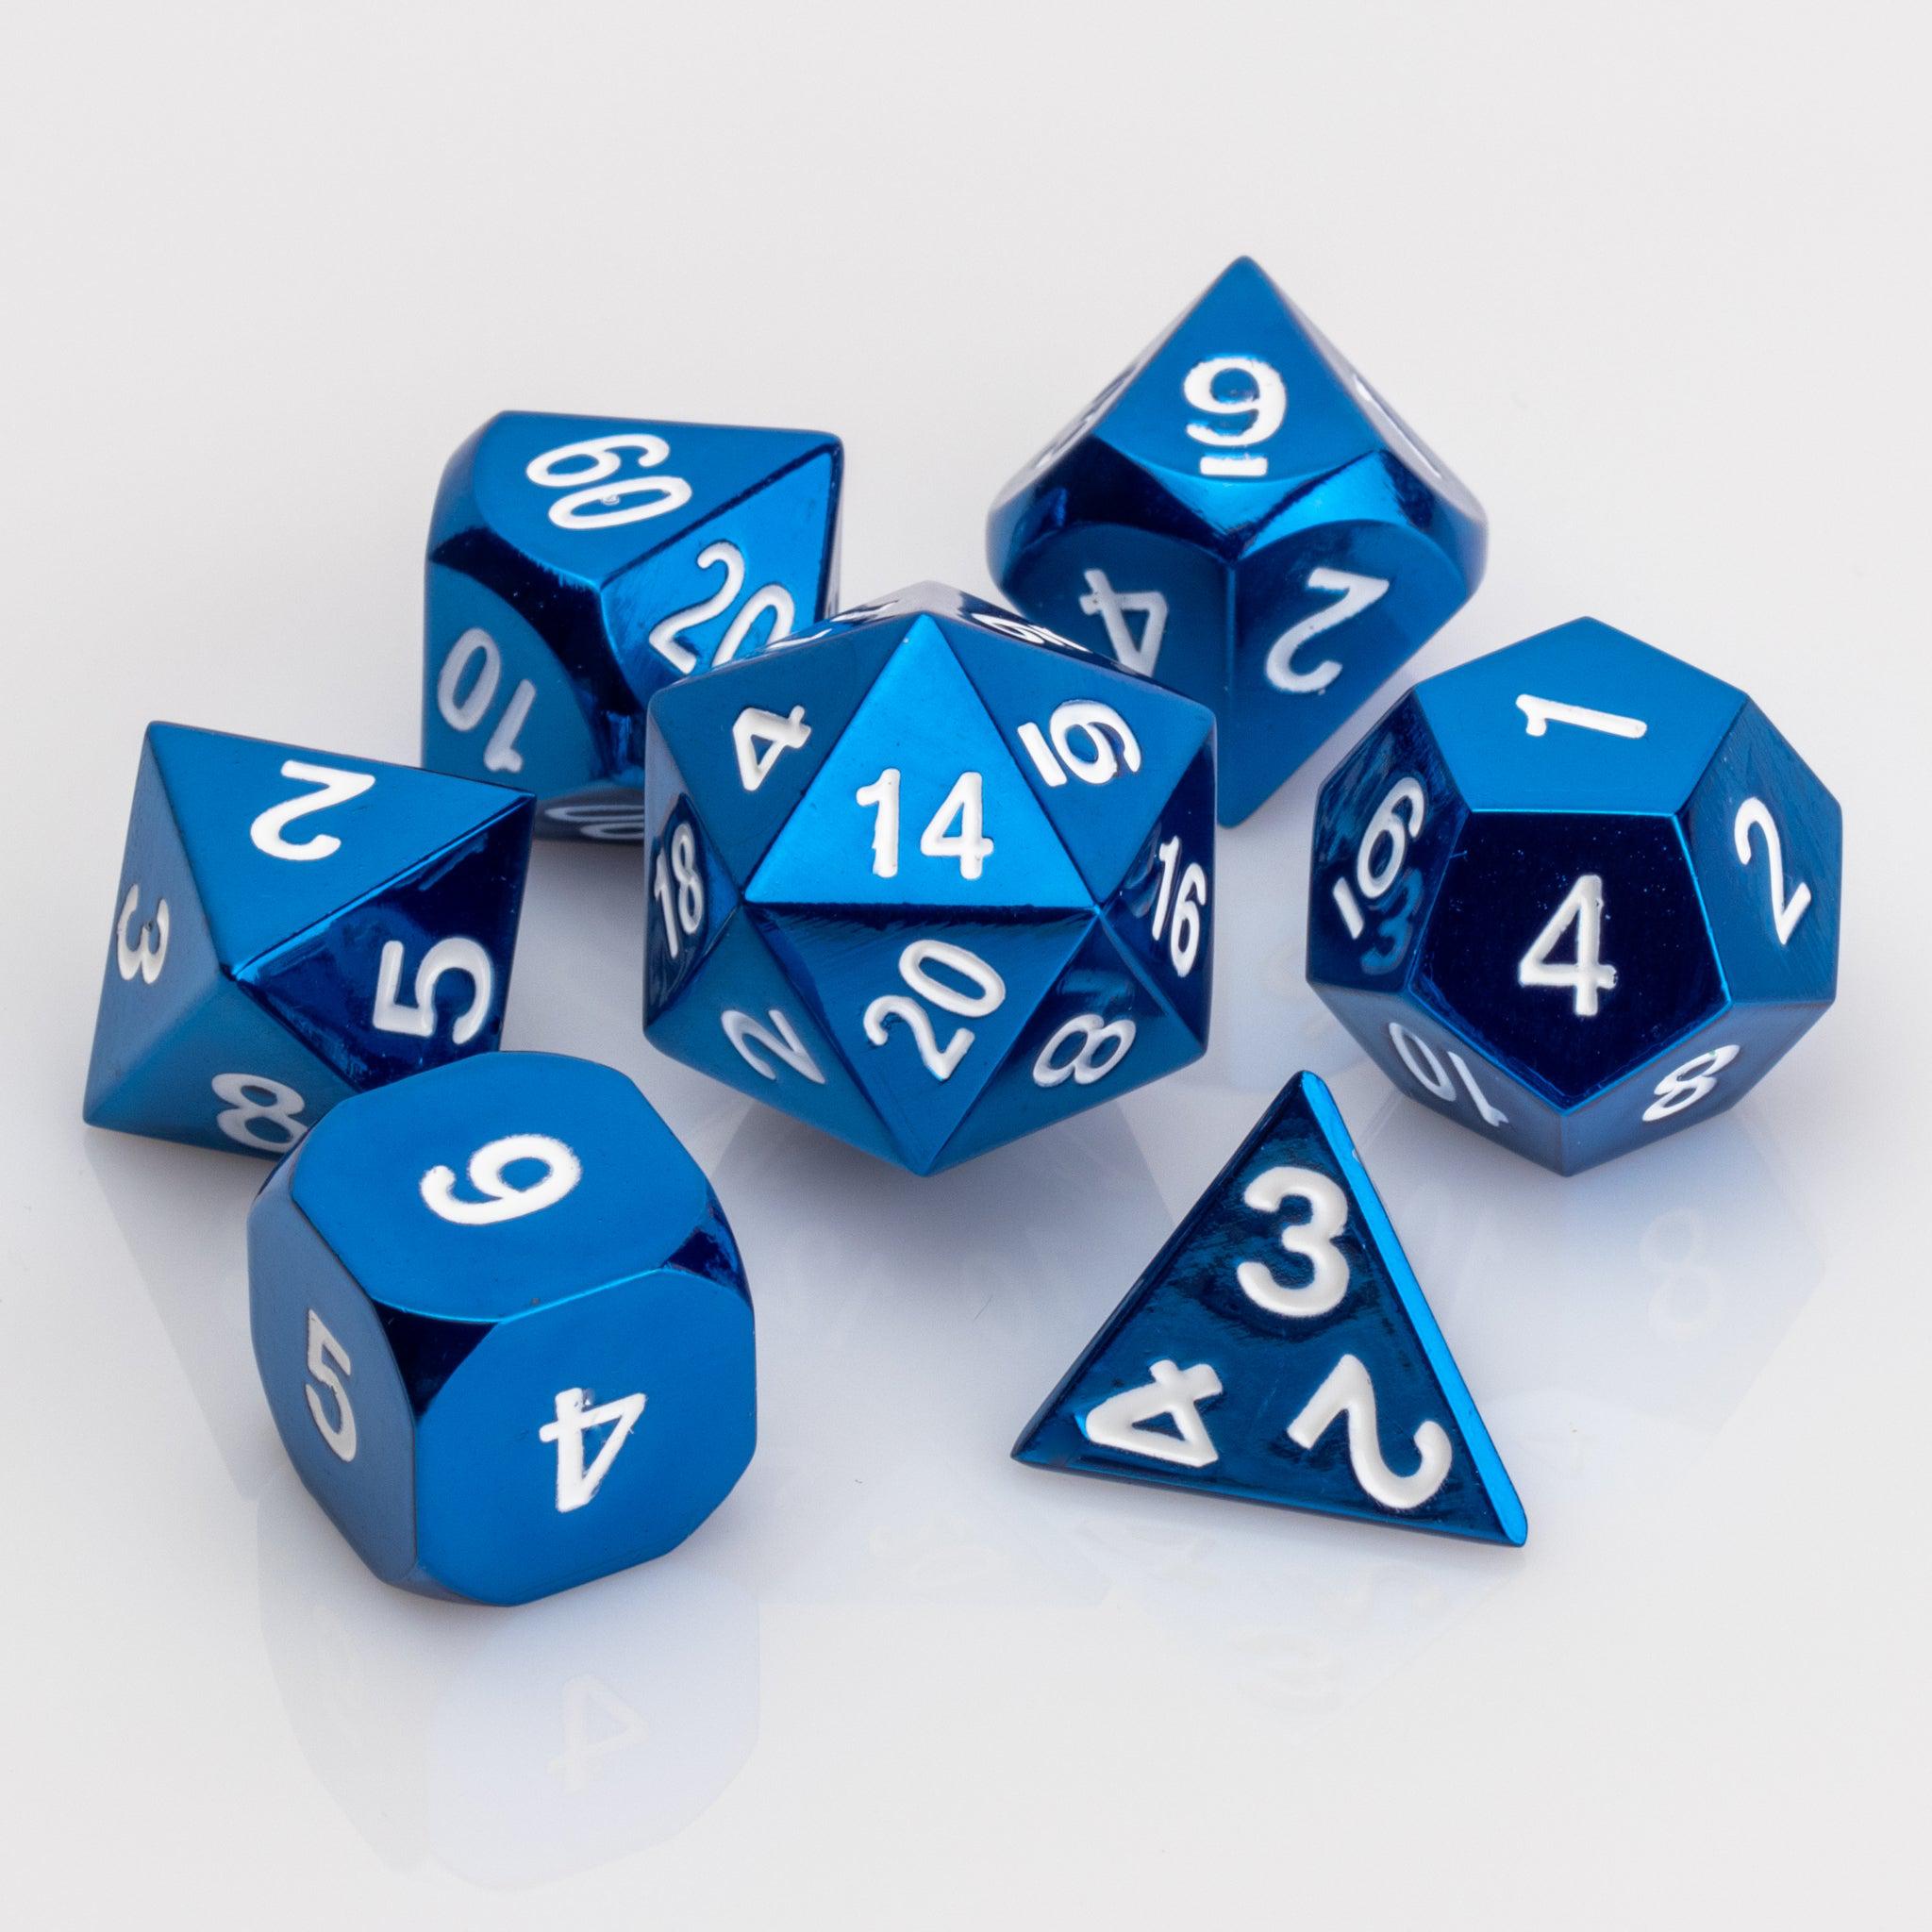 H3O, iridescent blue DND dice set on a white background.